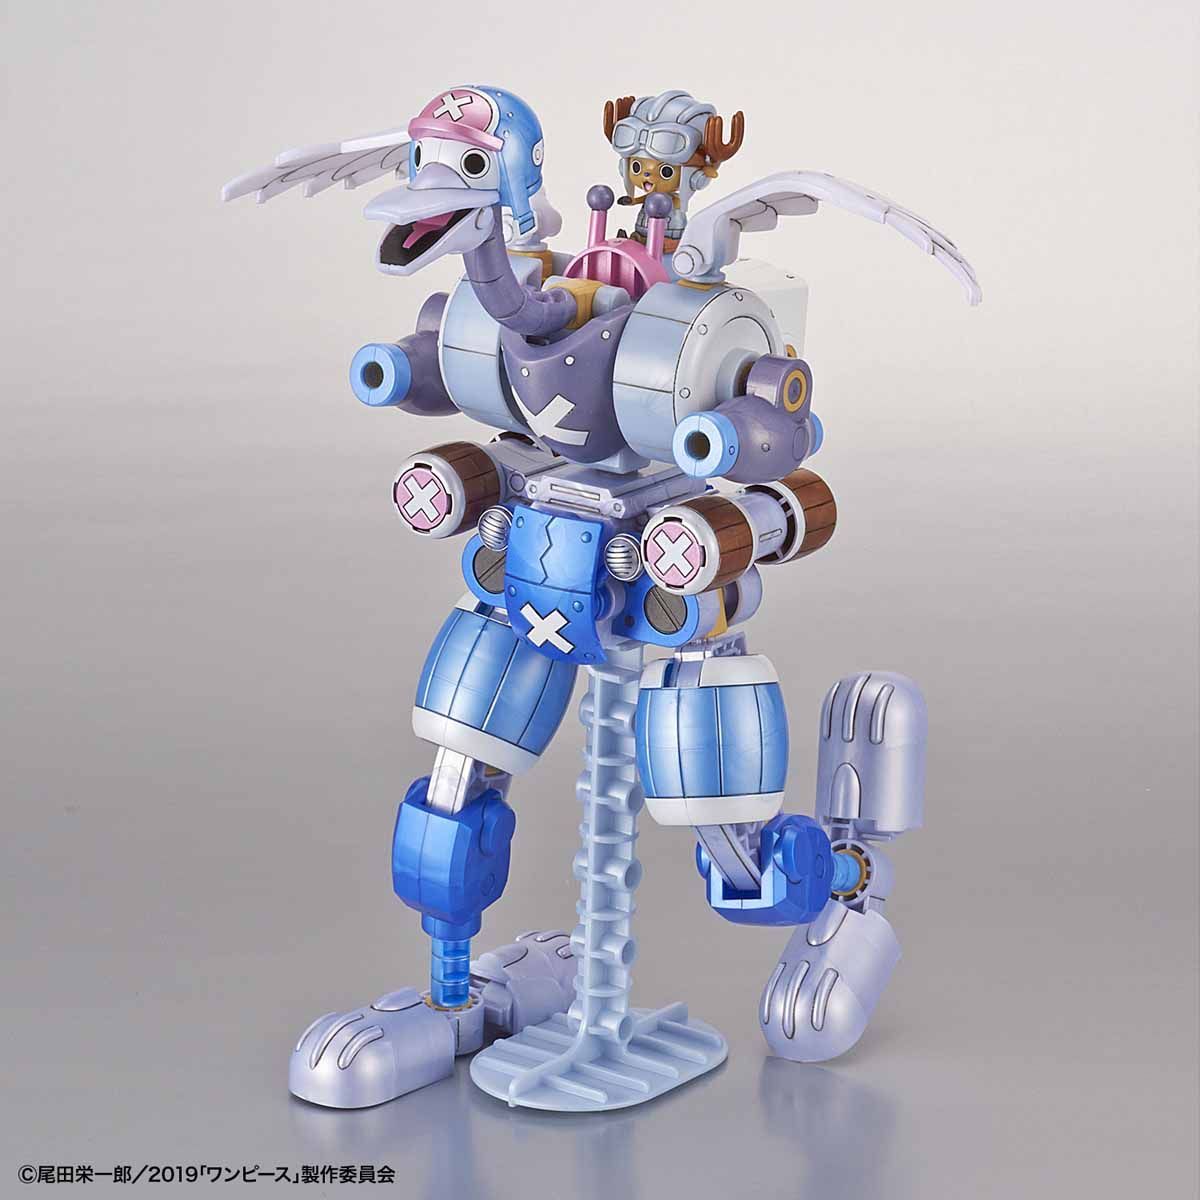 Chopper Robot 20th Anniversary "One Piece Stampede" Color Set